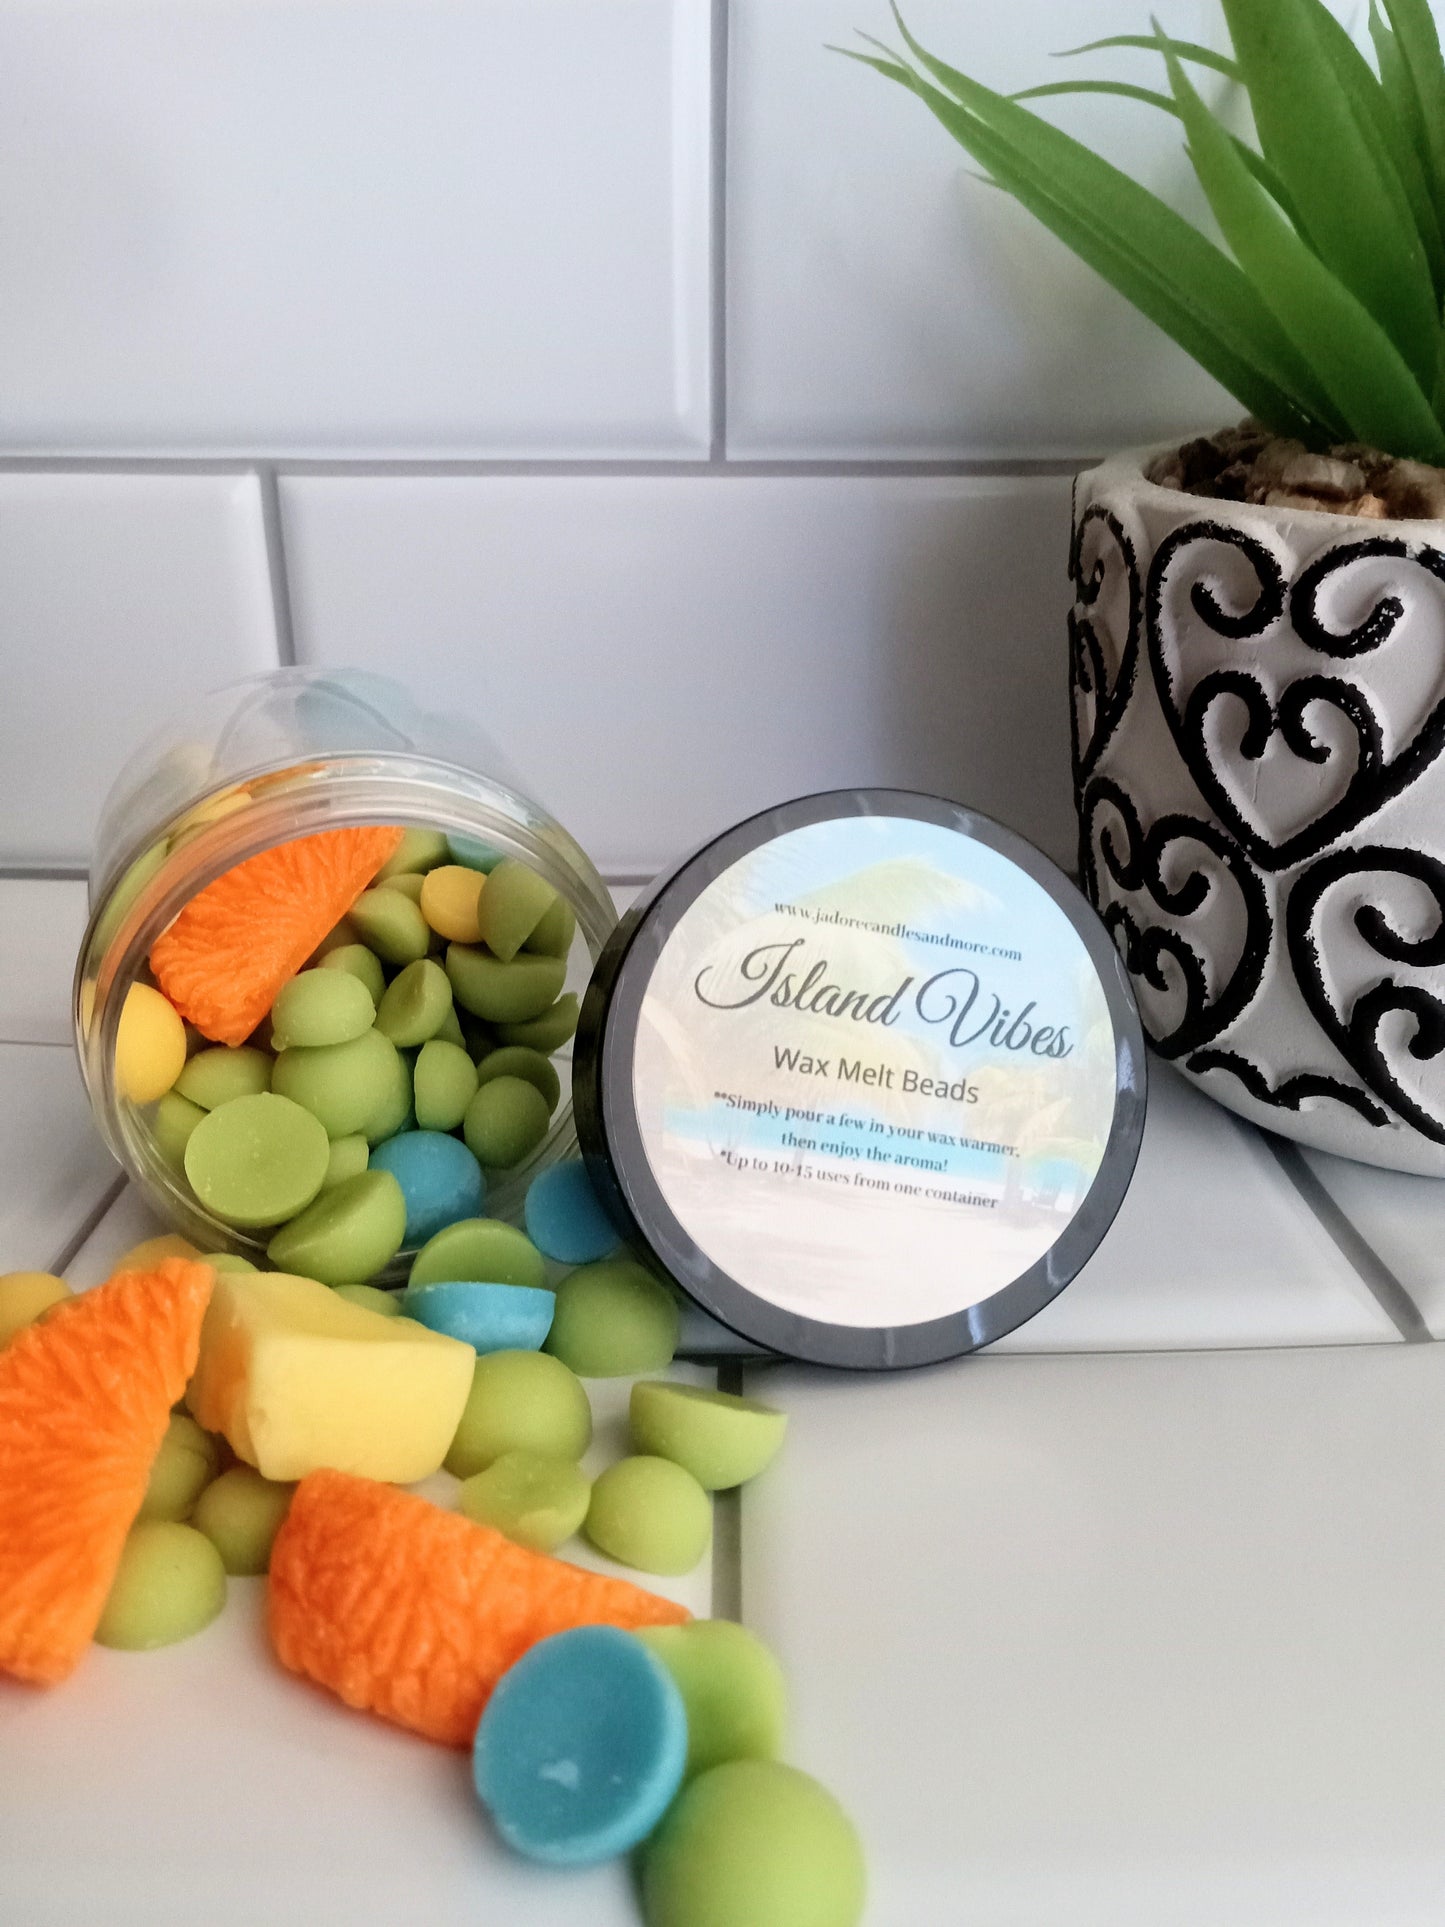 Wax Melt Beads (container)